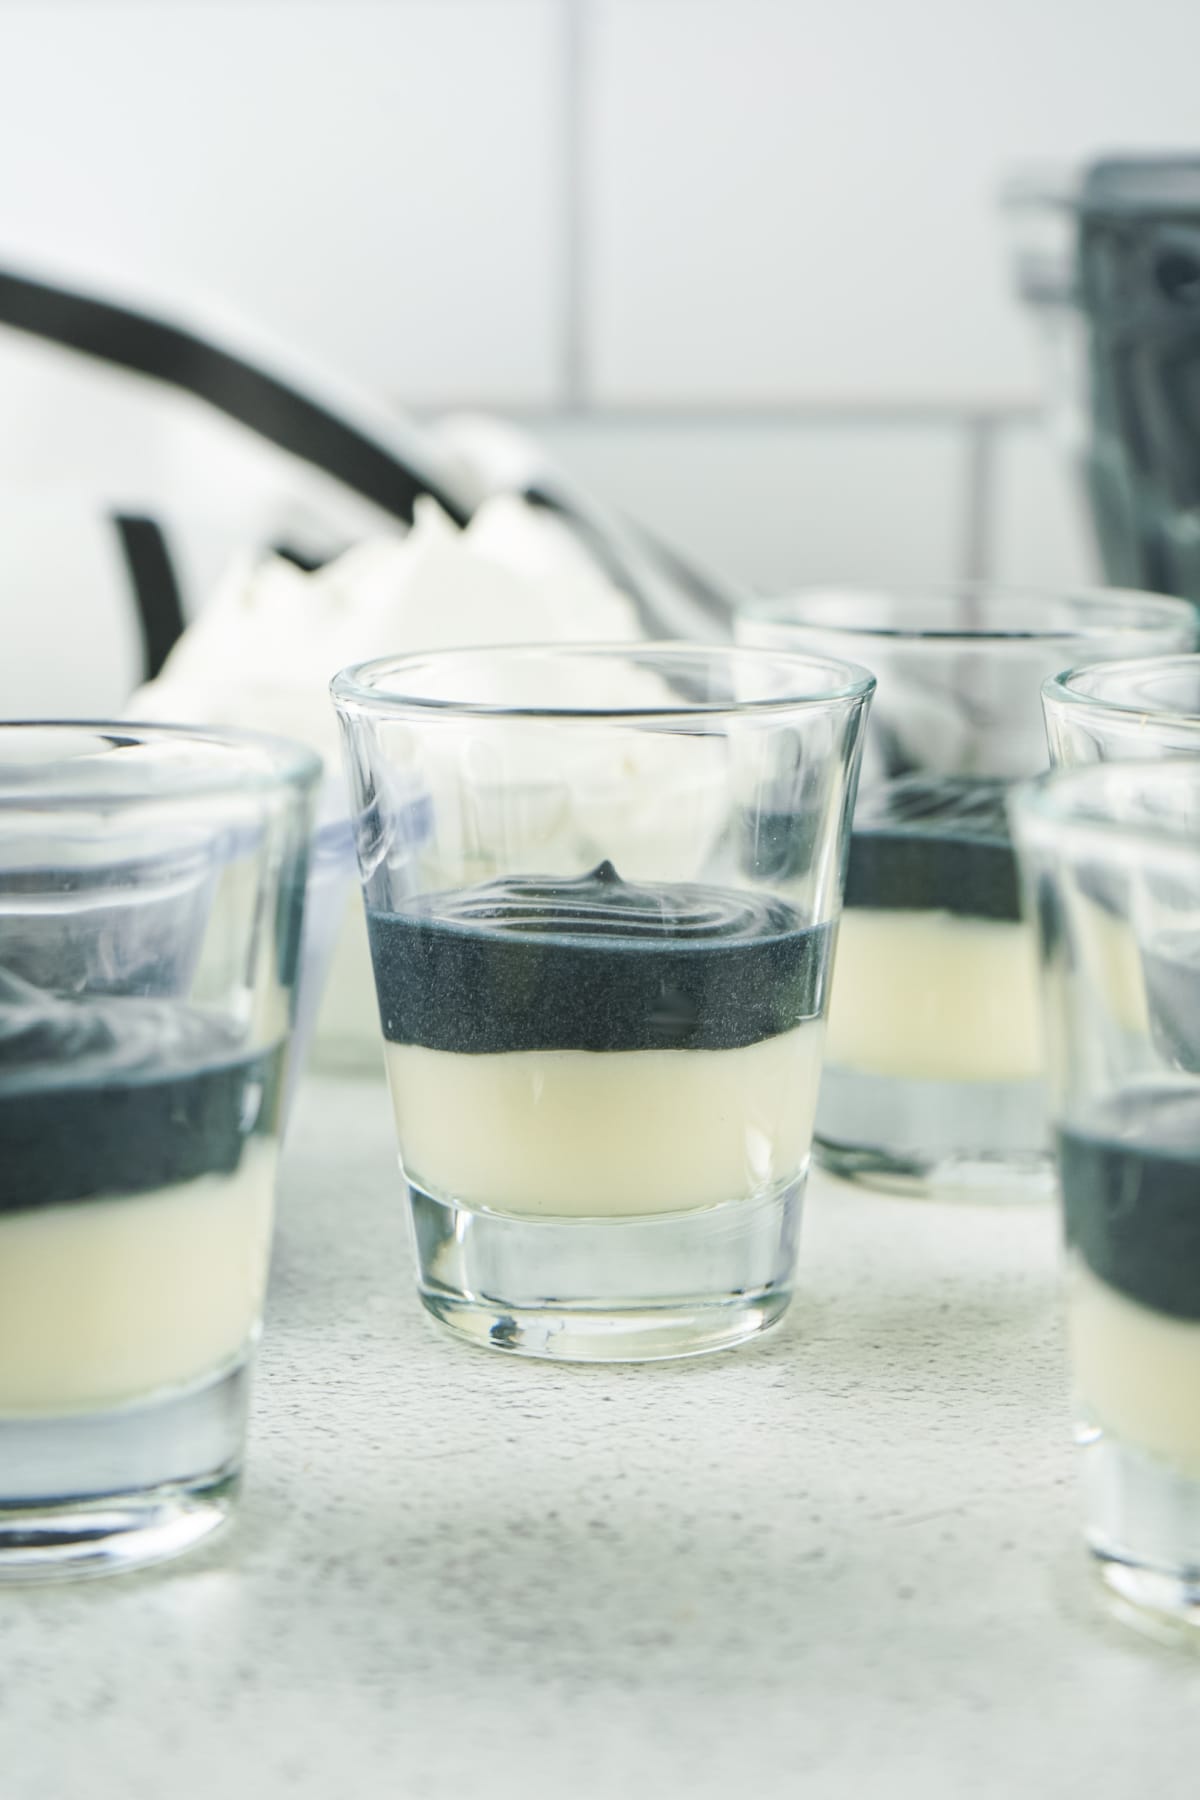 Black pudding layer in shot glasses